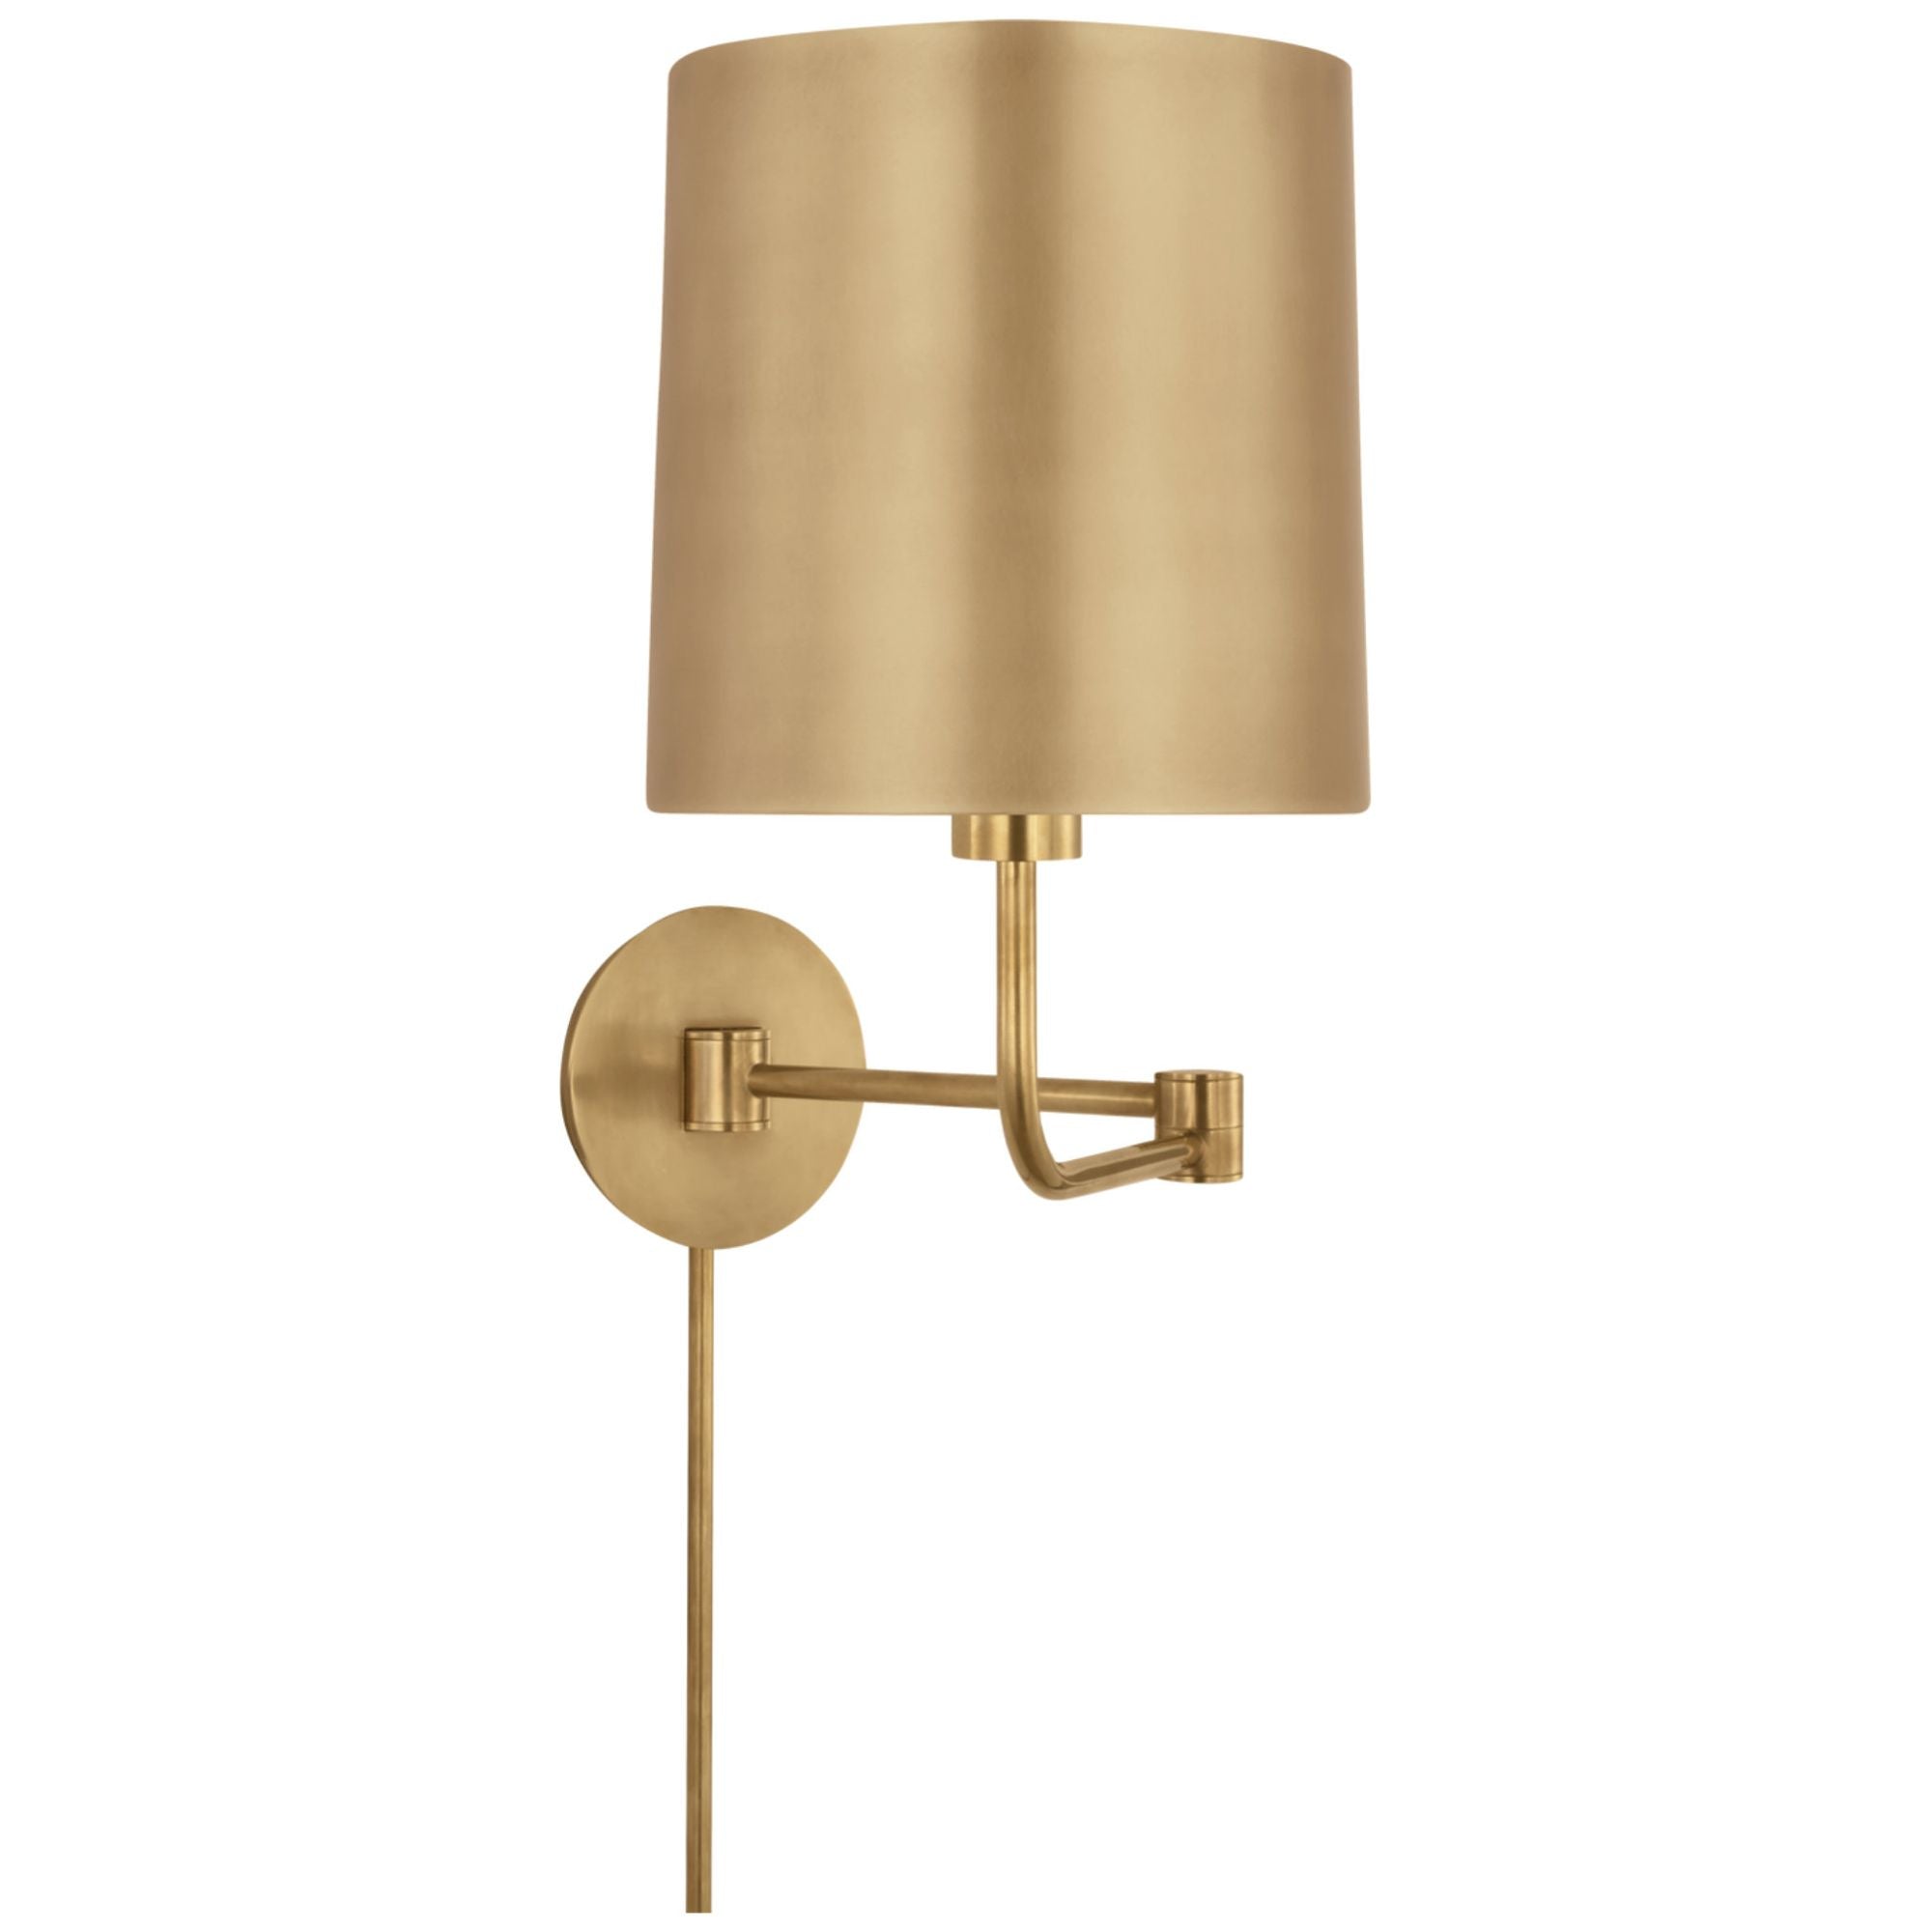 Barbara Barry Go Lightly Swing Arm Wall Light in Soft Brass with Soft Brass Shade